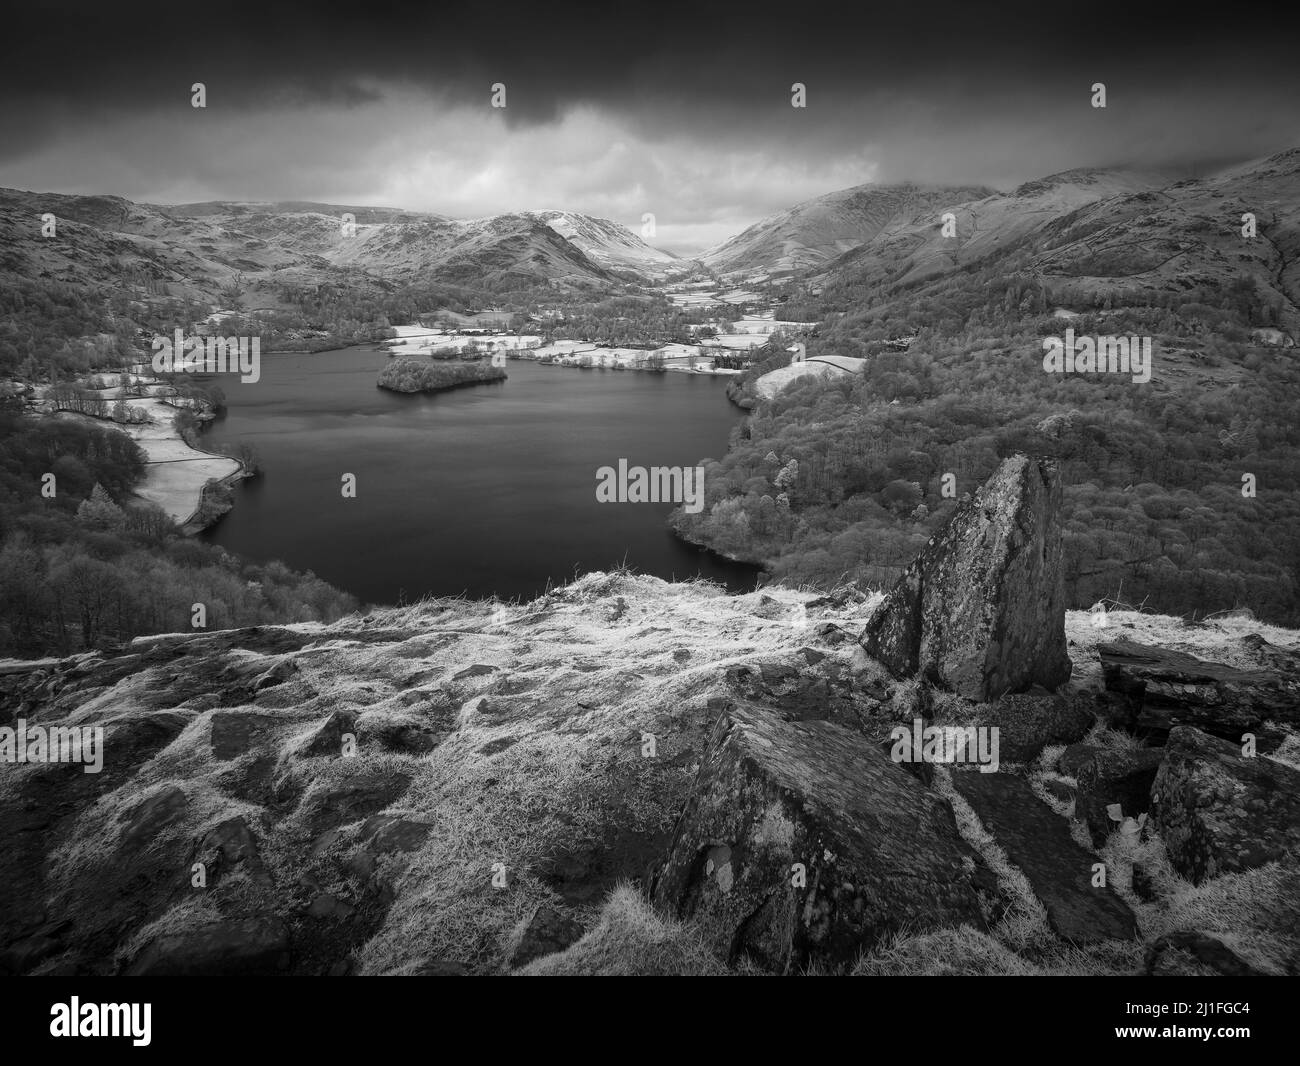 A black and white image of Grasmere from Loughrigg Fell in the Lake District National Park, Cumbria, England. Stock Photo